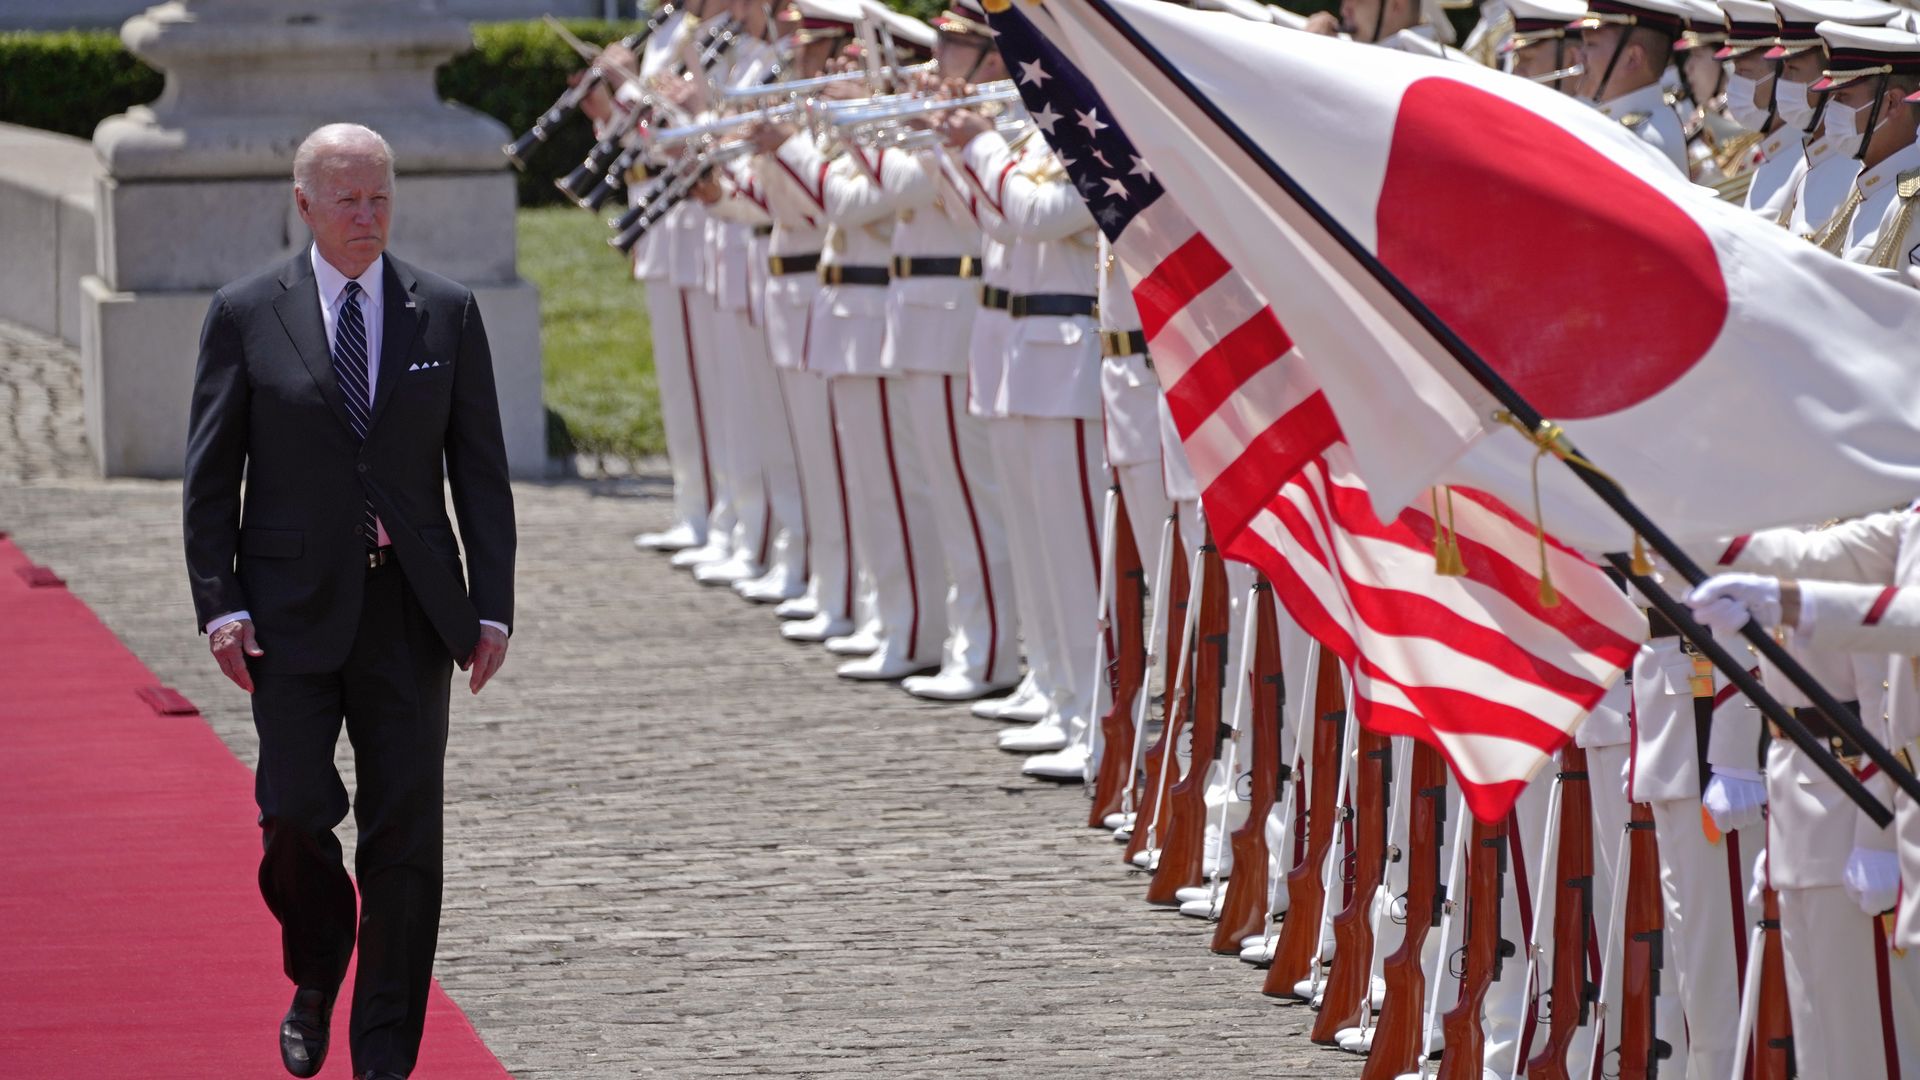 President Joe Biden reviews an honour guard during a welcome ceremony for Biden at the Akasaka State Guest House on May 23, 2022 in Tokyo, Japan. 